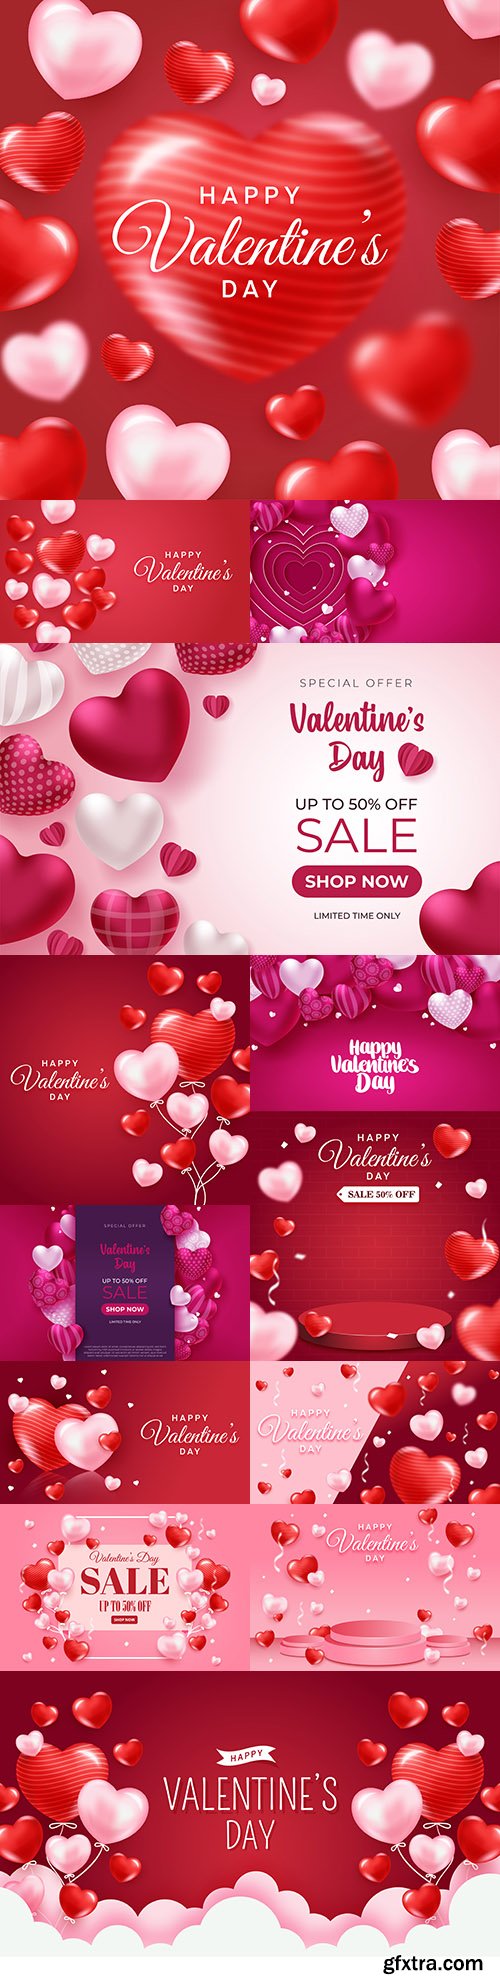 Valentine's Day illustrations with heart-shaped balloons
